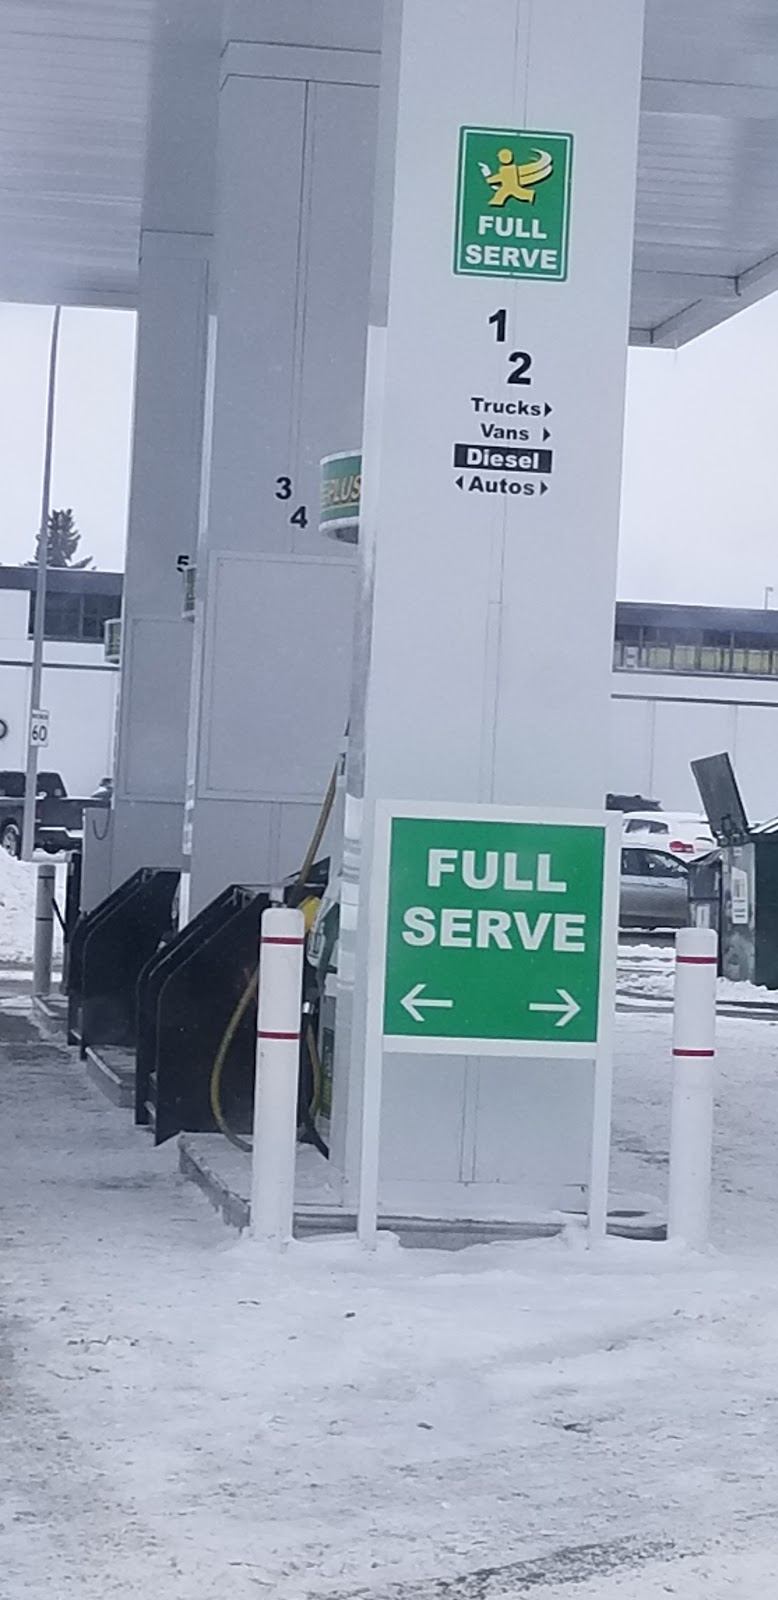 Fas Gas Plus - Gas Station | 3218 49 Ave, Red Deer, AB T4N 6R5, Canada | Phone: (403) 340-1888